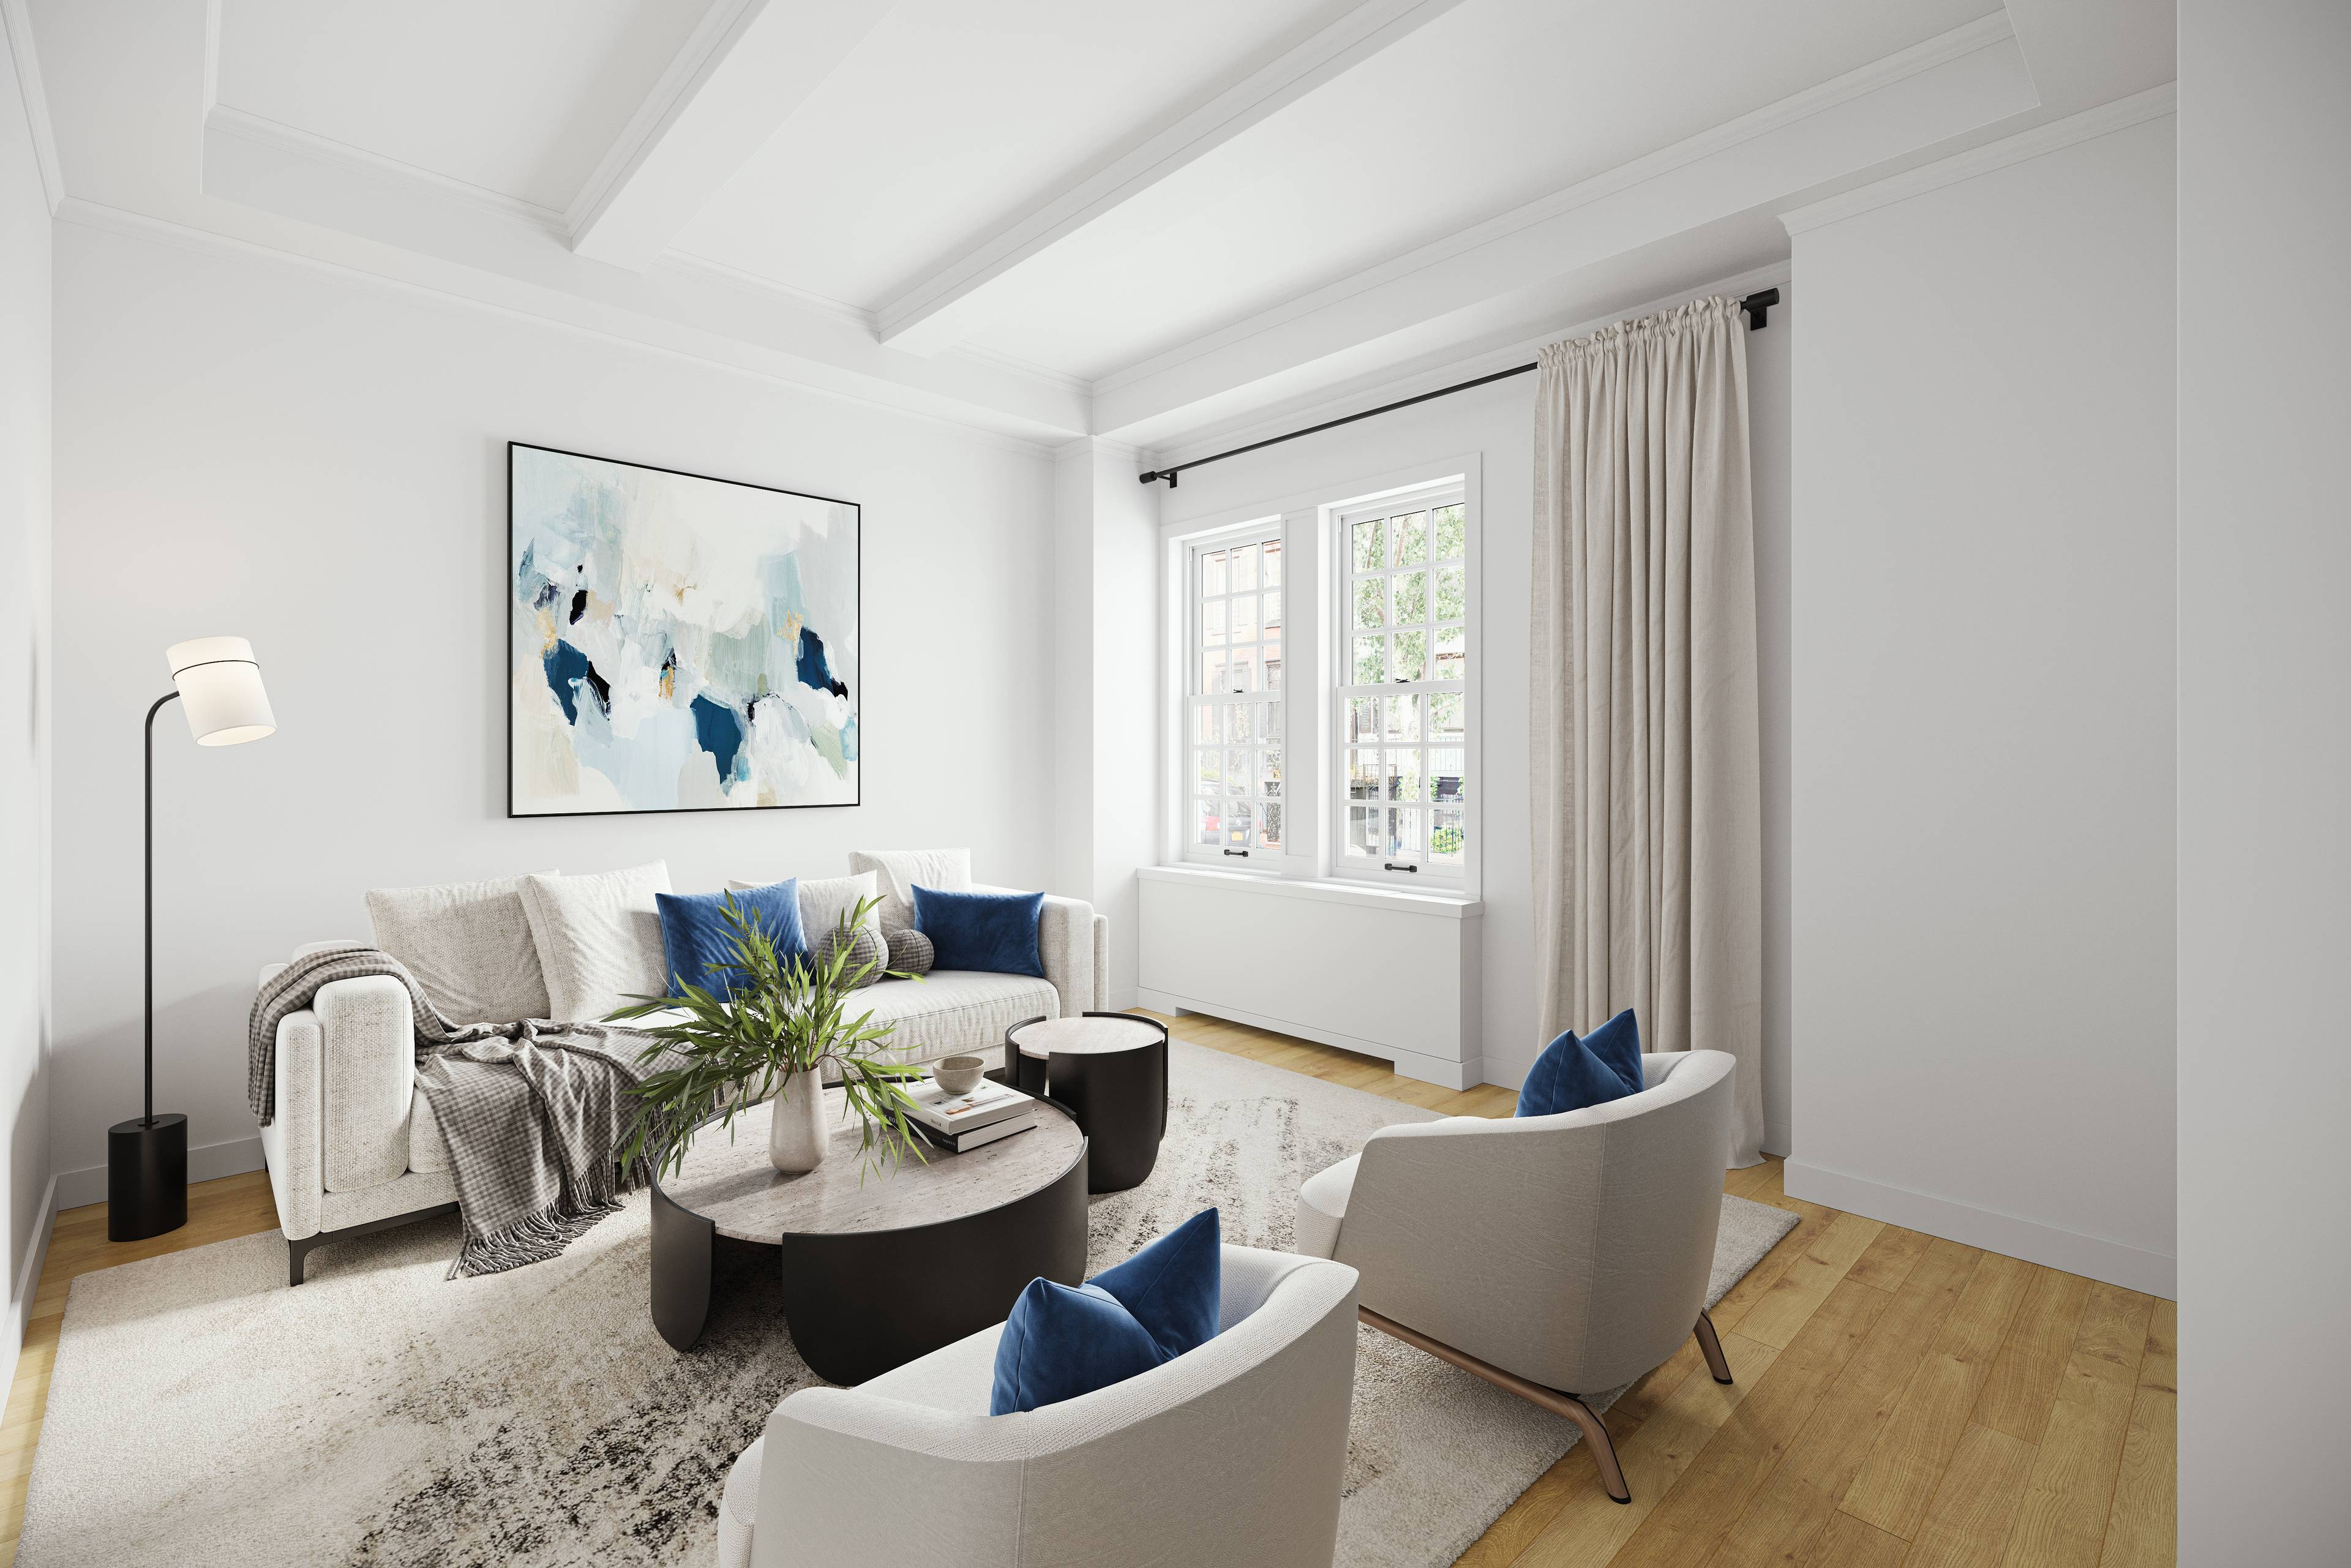 Discover the timeless elegance of Maisonette 1W at 117 East 72nd Street, an extraordinary acquisition opportunity.